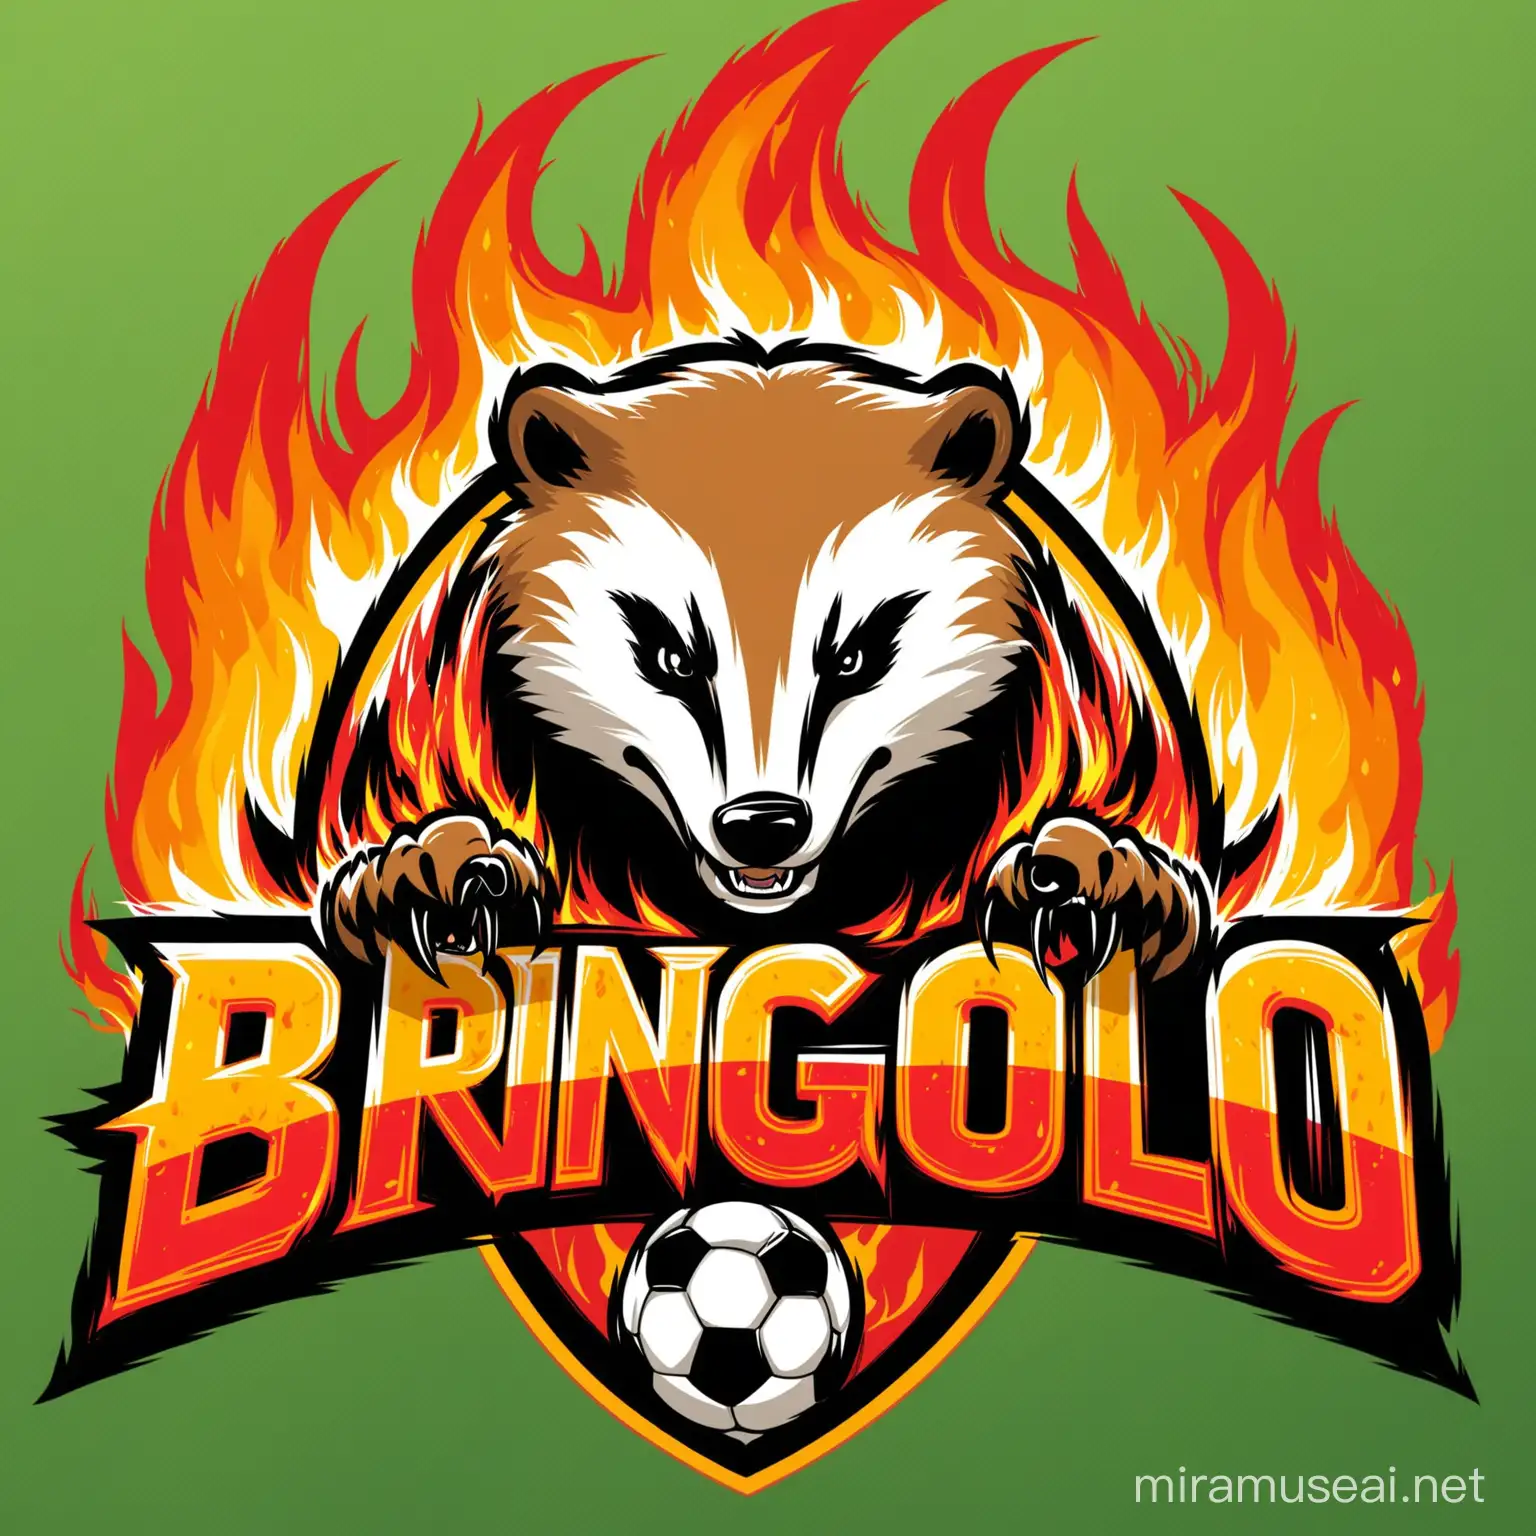 logo for bringolo soccer team, with an aggressive badger in flames